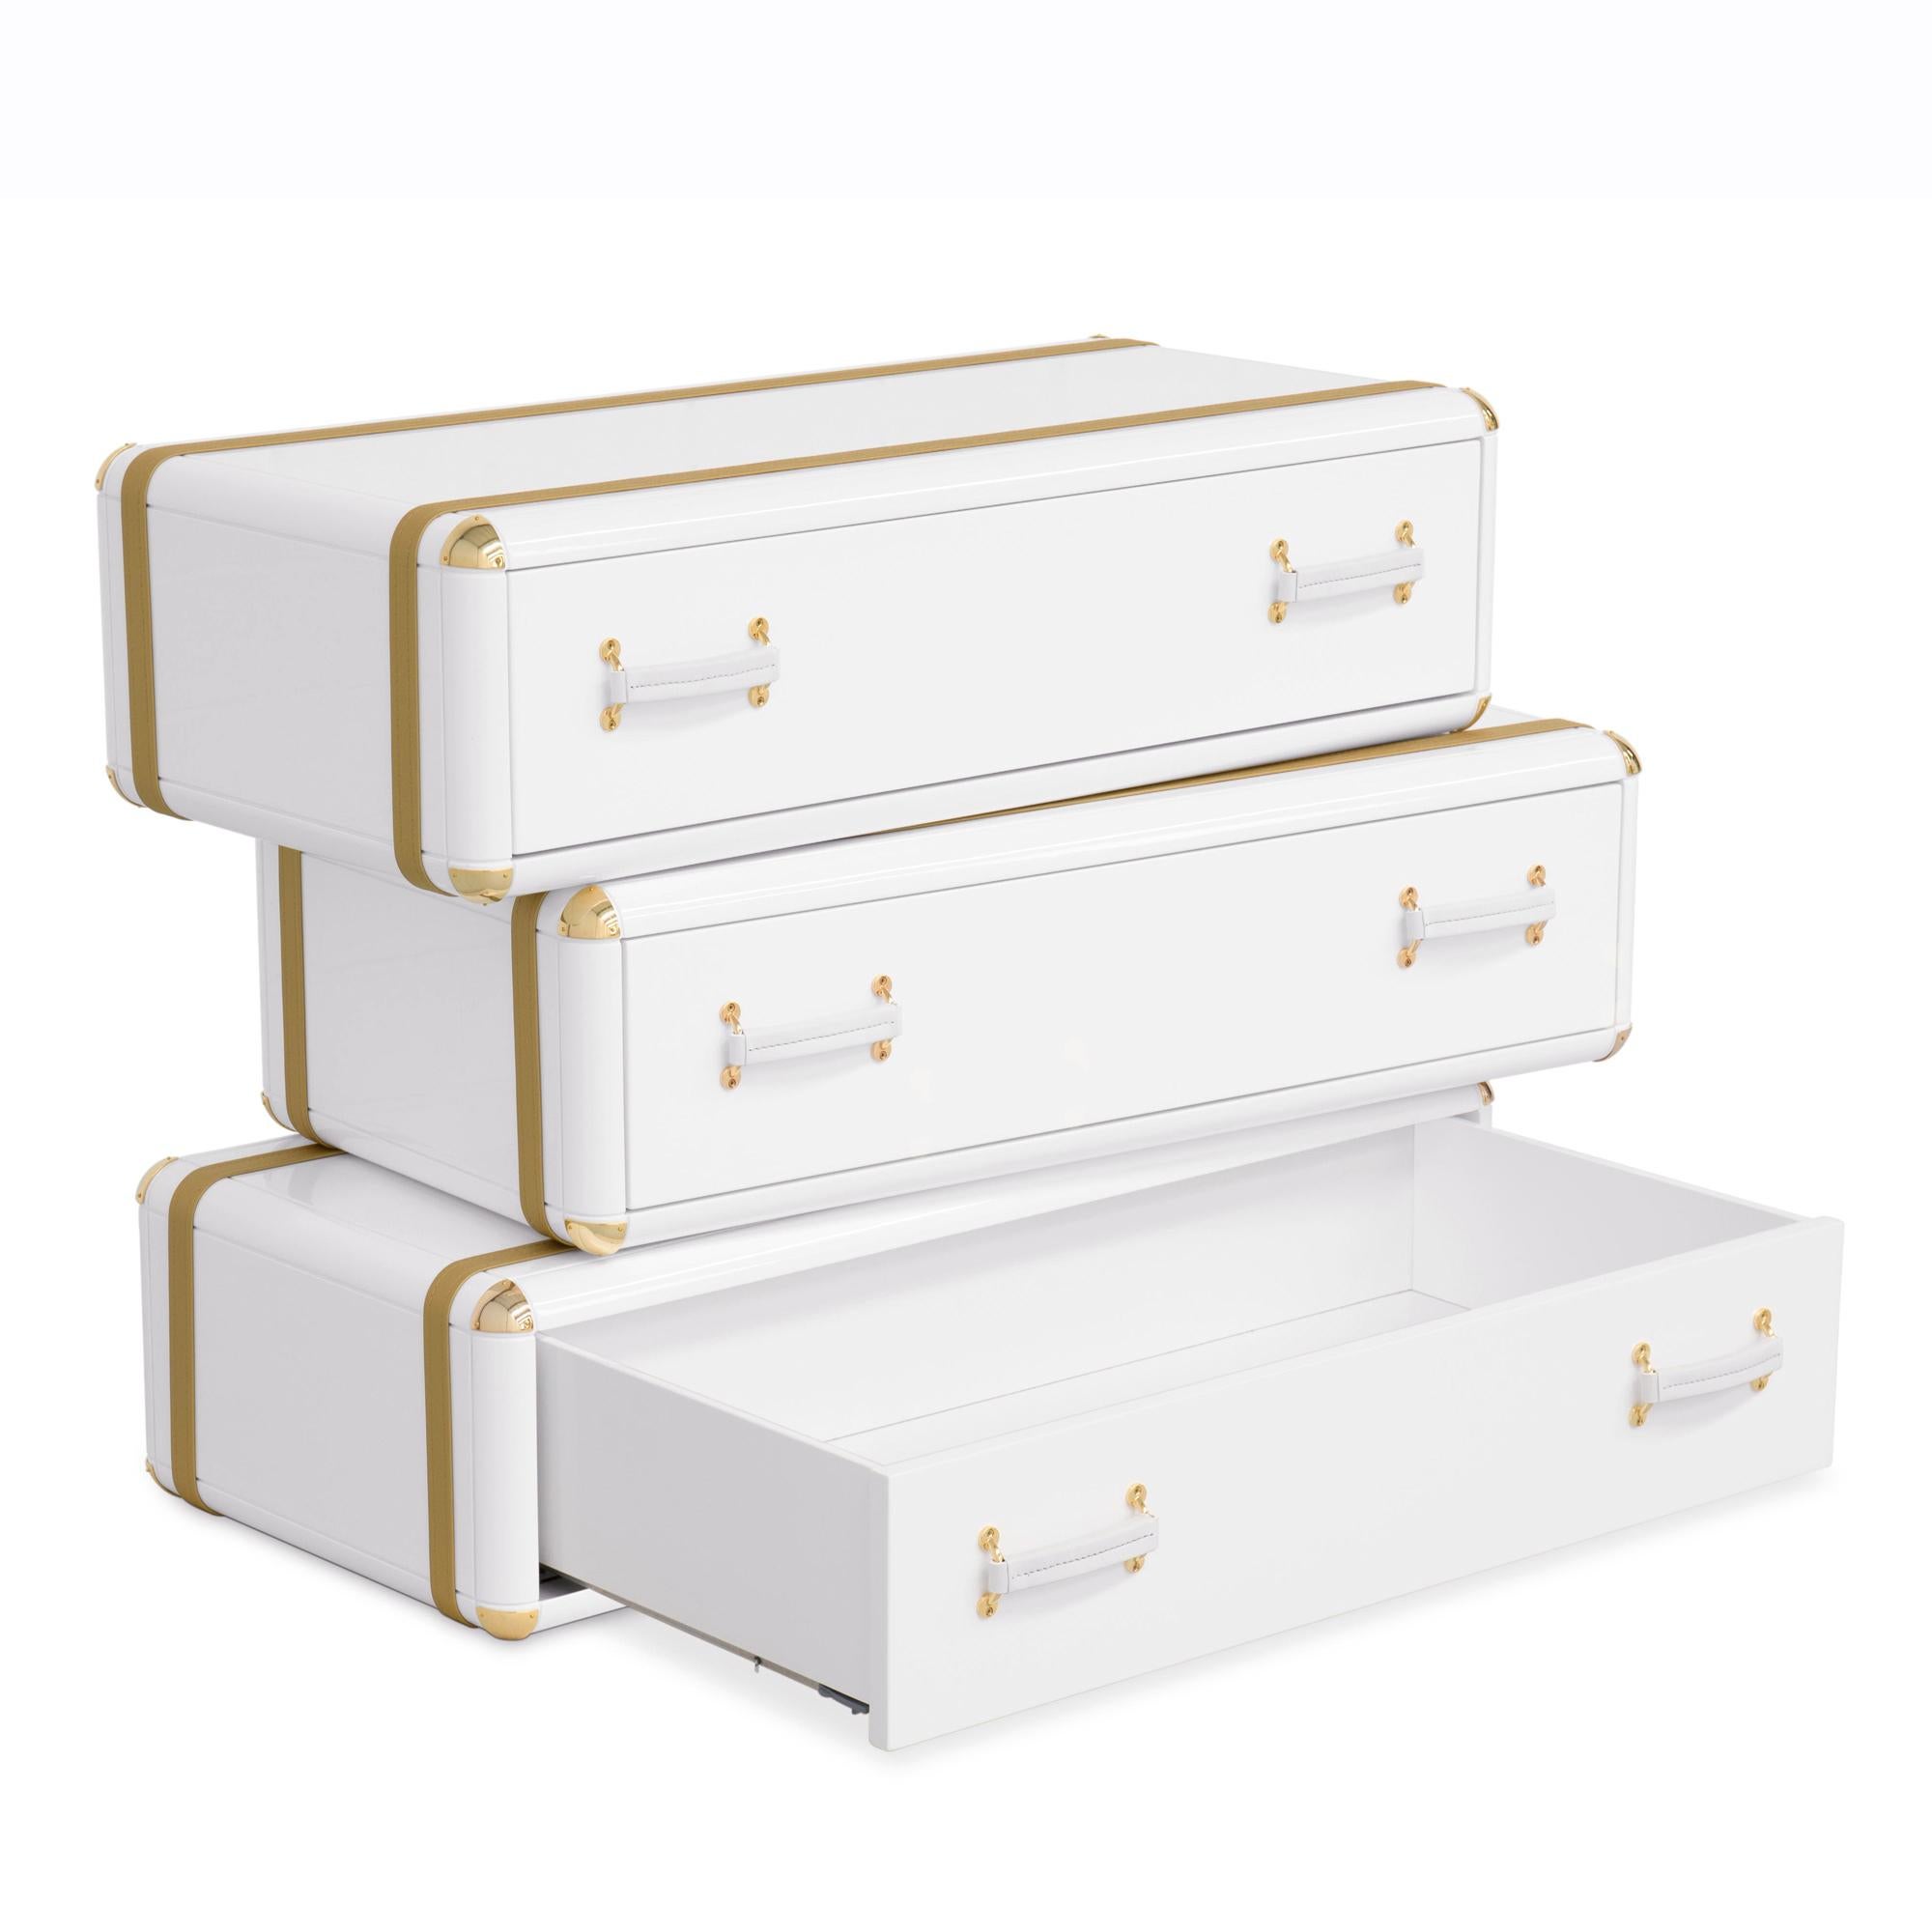 Hand-Crafted White Flight Case Shelf of 3 Drawers in White Lacquered Finish For Sale